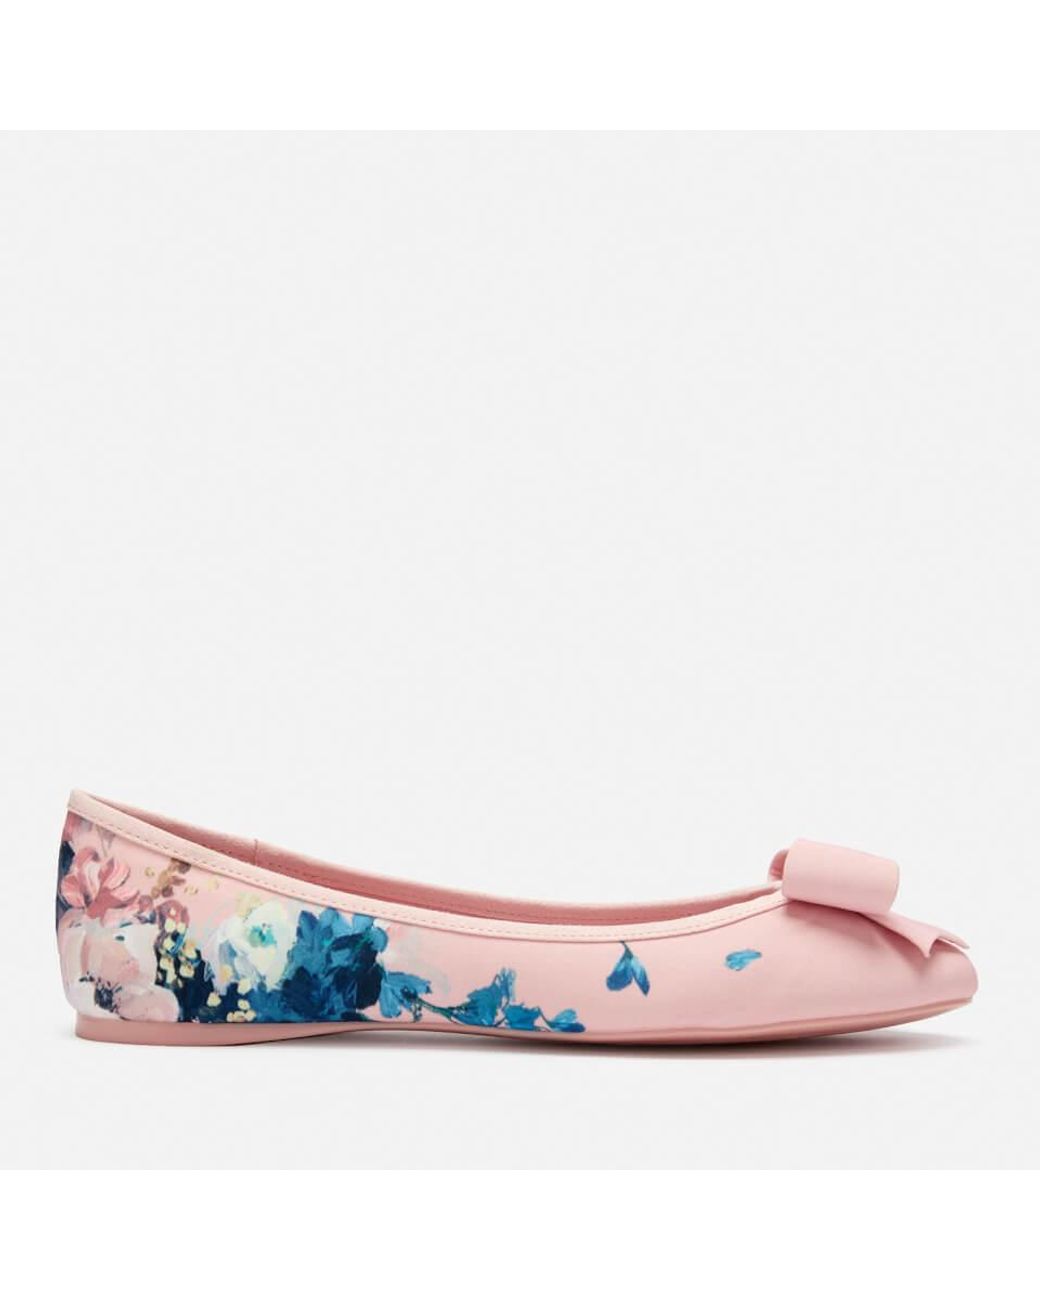 Ted Baker Immep Floral Ballet Flats in Pink | Lyst Canada